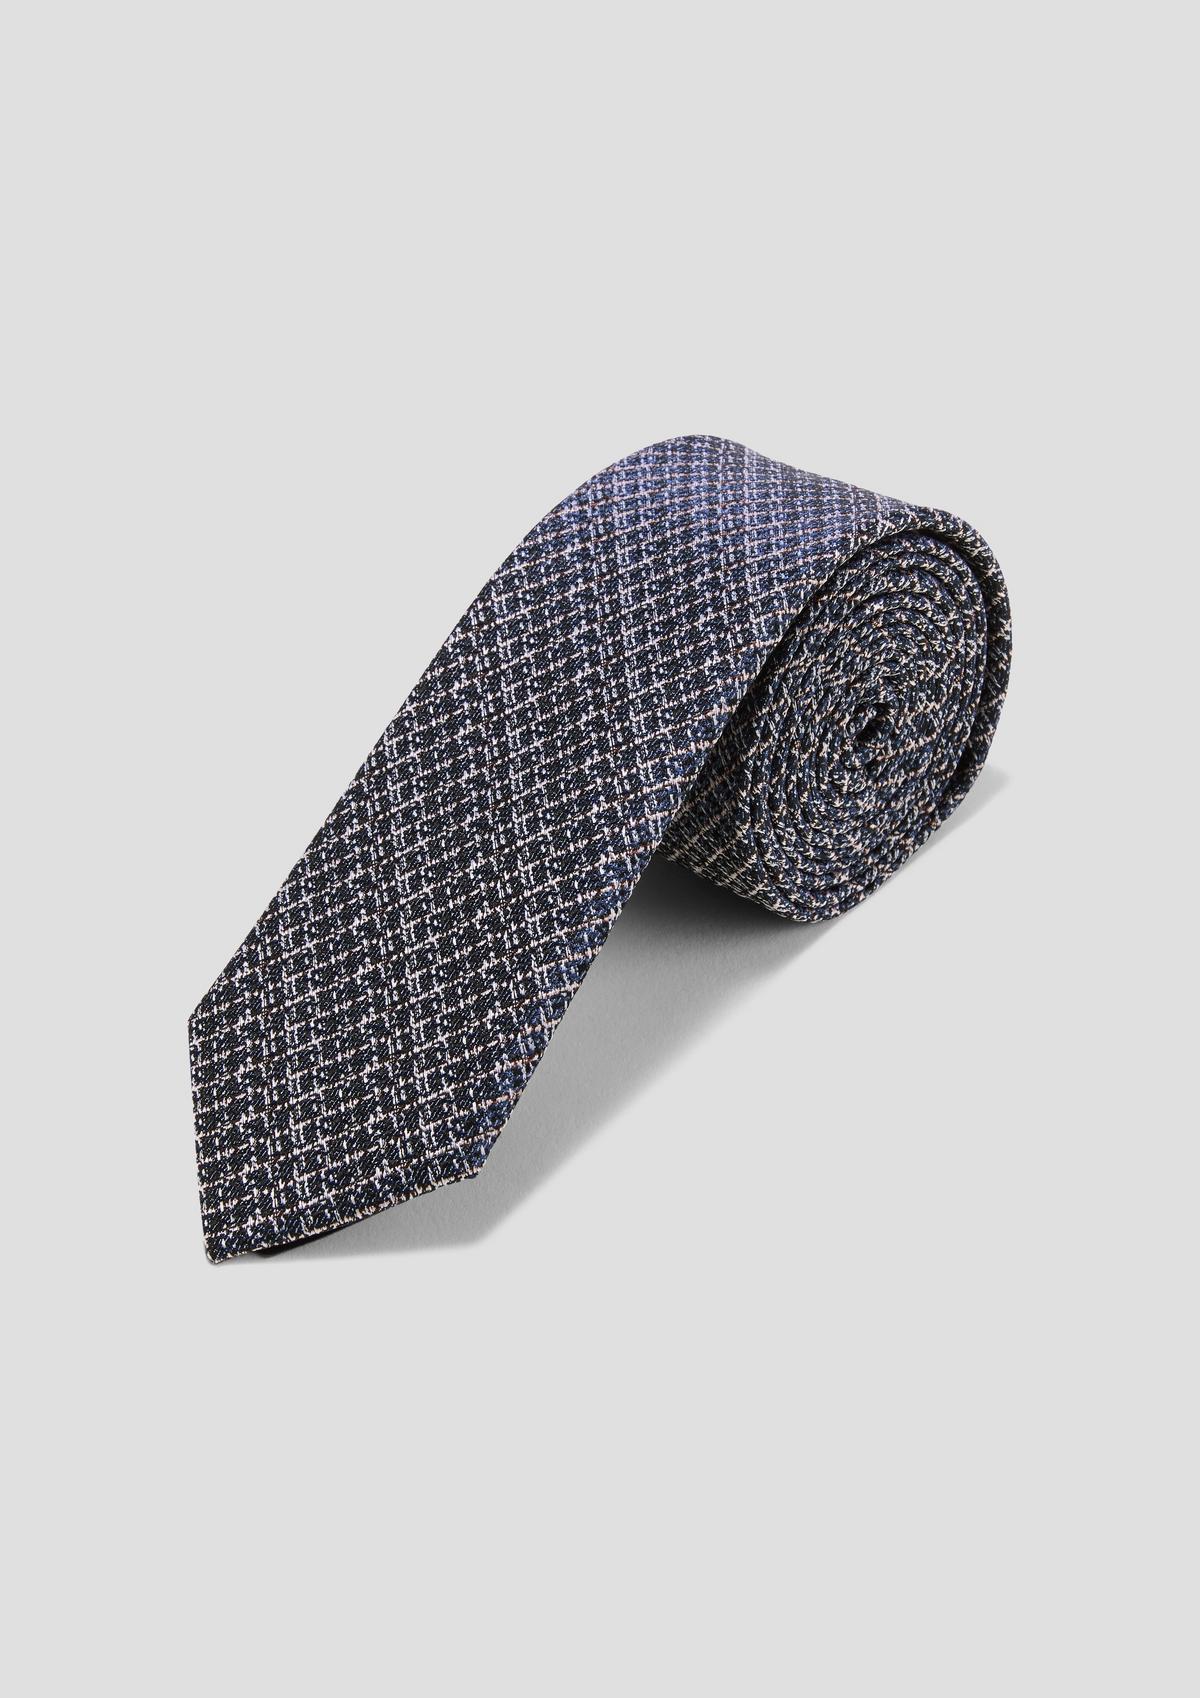 s.Oliver Tie with a dobby texture